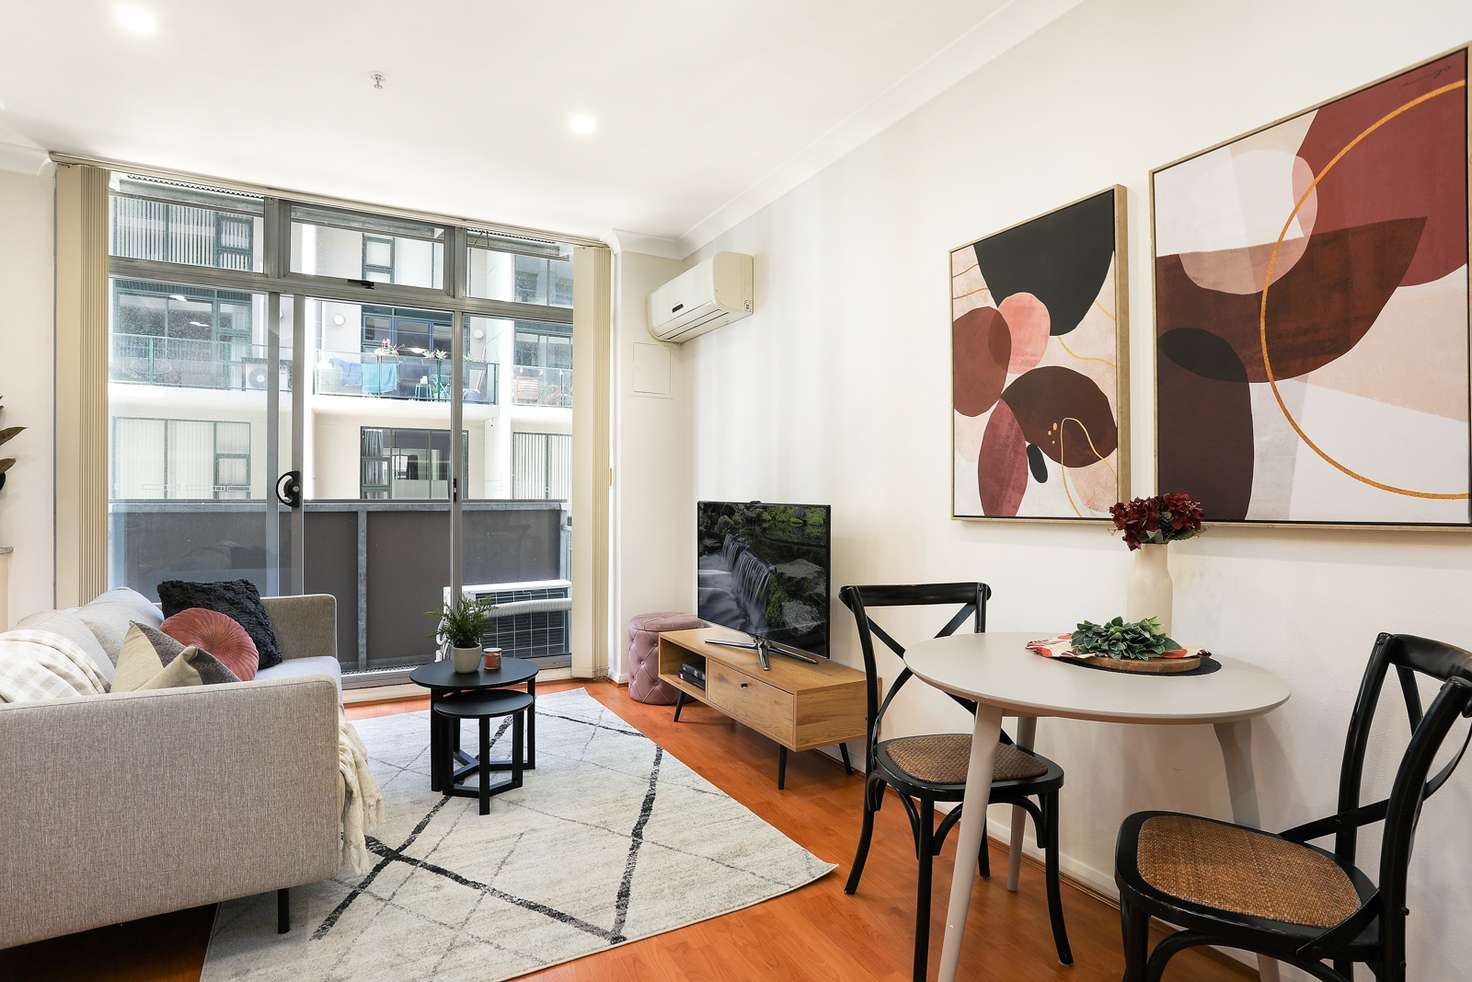 Main view of Homely apartment listing, 44/6-18 Poplar St, Surry Hills NSW 2010